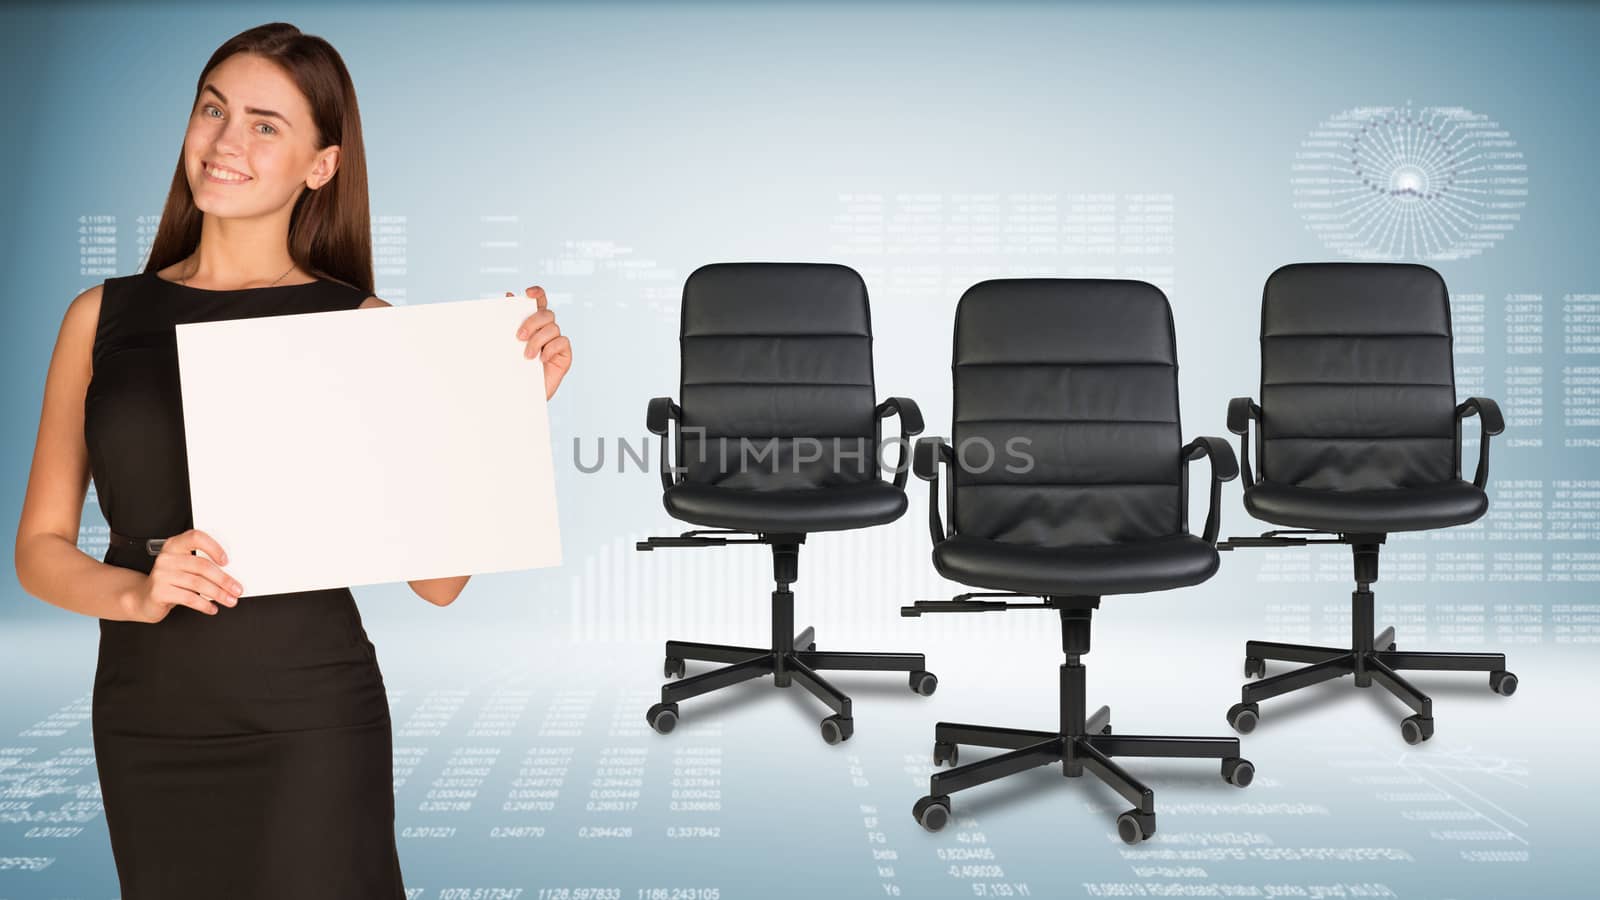 Businesswoman holding blank white paper sheet, looking at camera, smiling. Three office chairs beside. Hi-tech graphs as backdrop